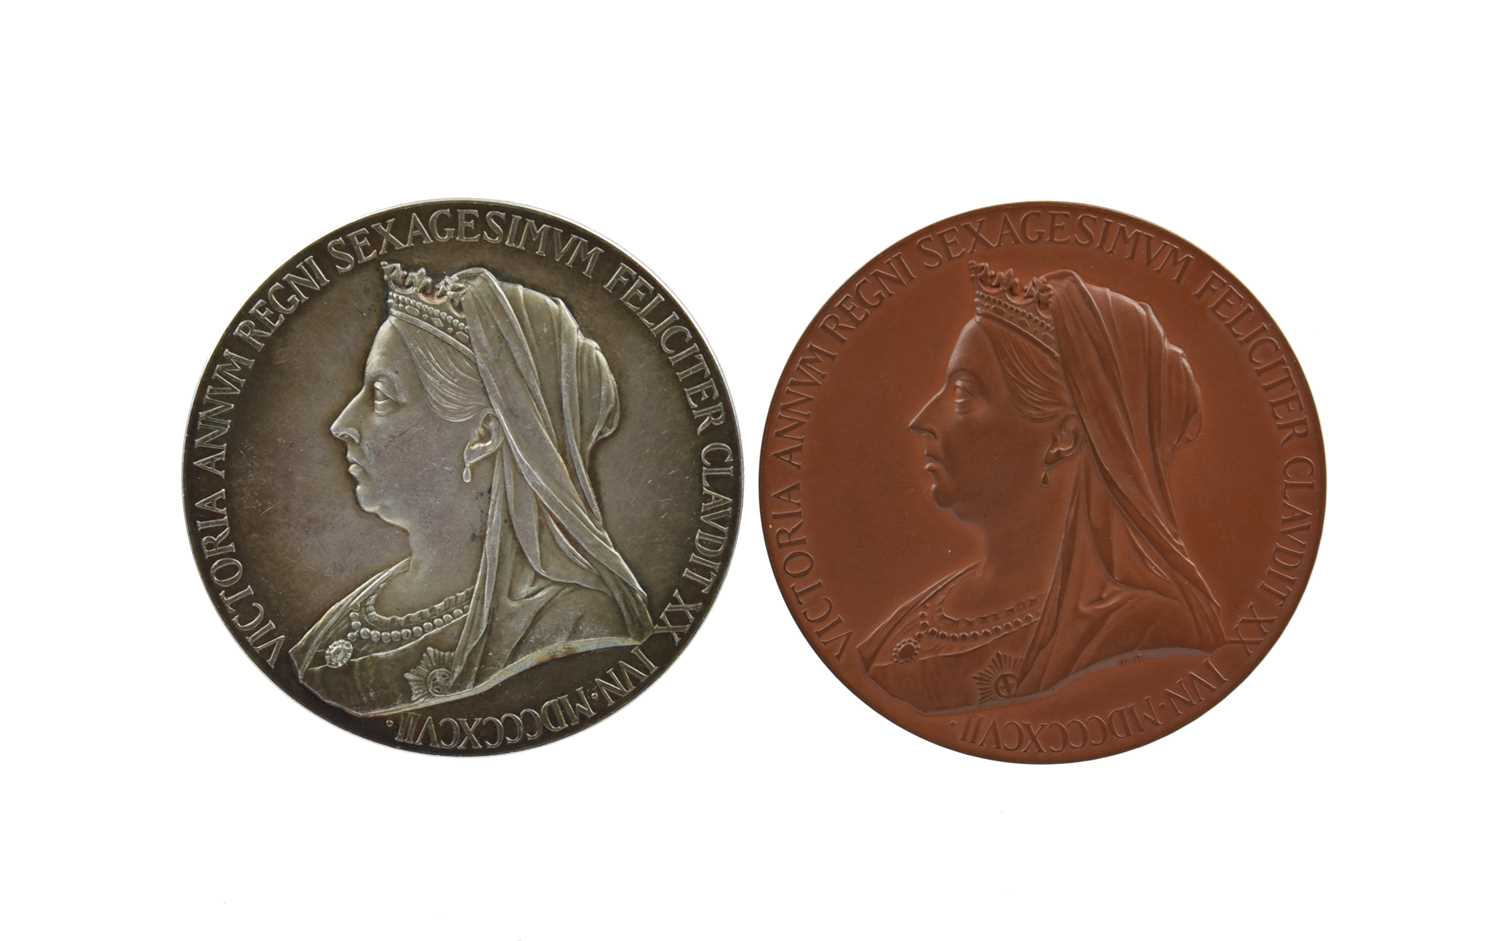 Victoria, Diamond Jubilee 1897, a silver medal by G. W. De Saulles, veiled bust left, rev. young